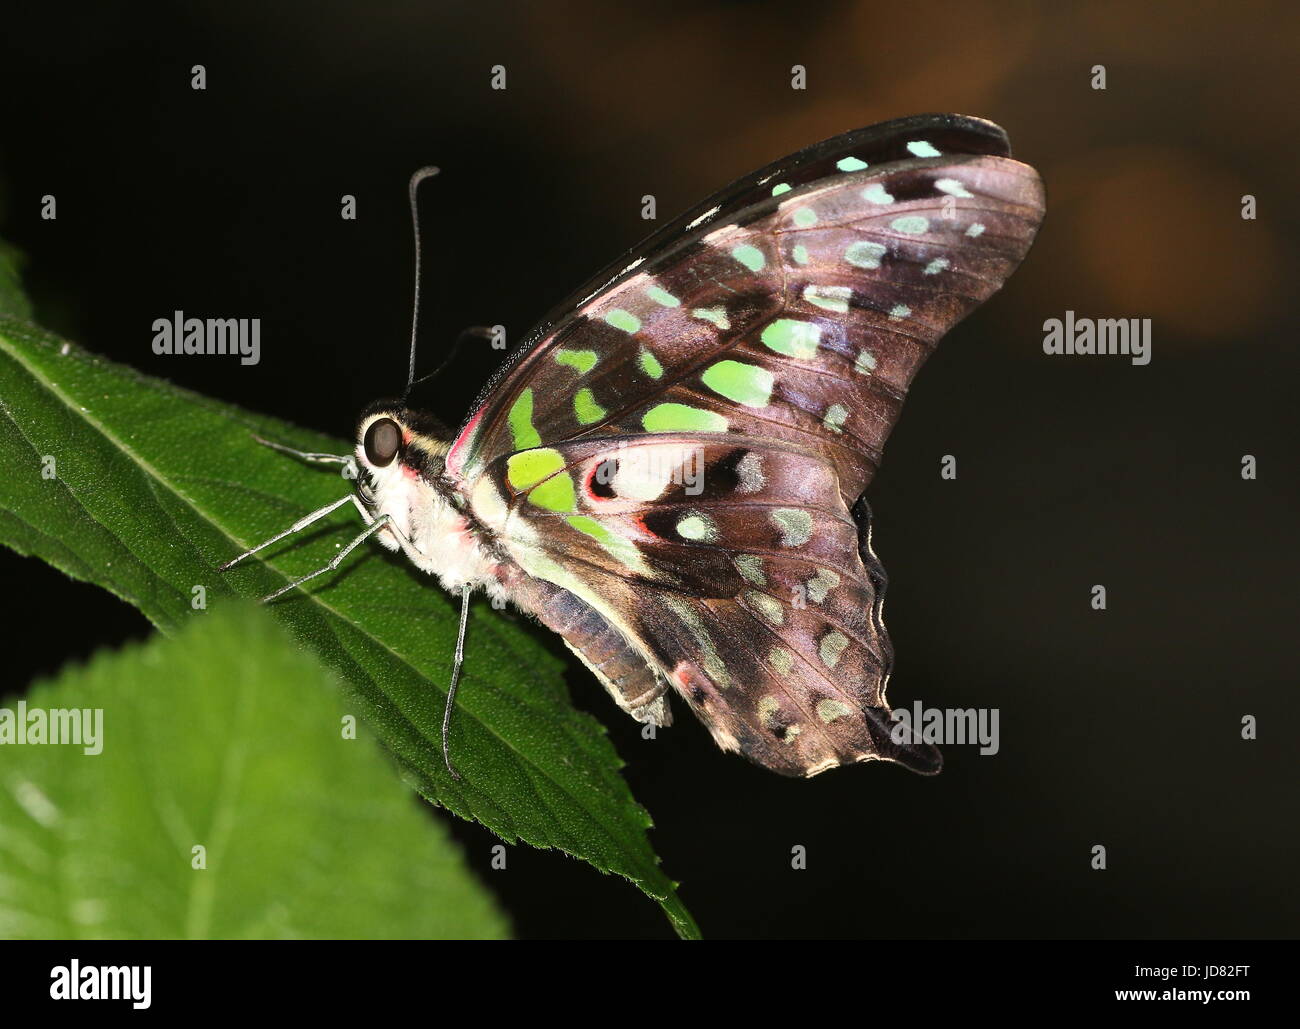 Queue d'Asie du Sud Green Jay Butterfly (Graphium agamemnon) alias Triangle vert ou vert-spotted Triangle. Banque D'Images